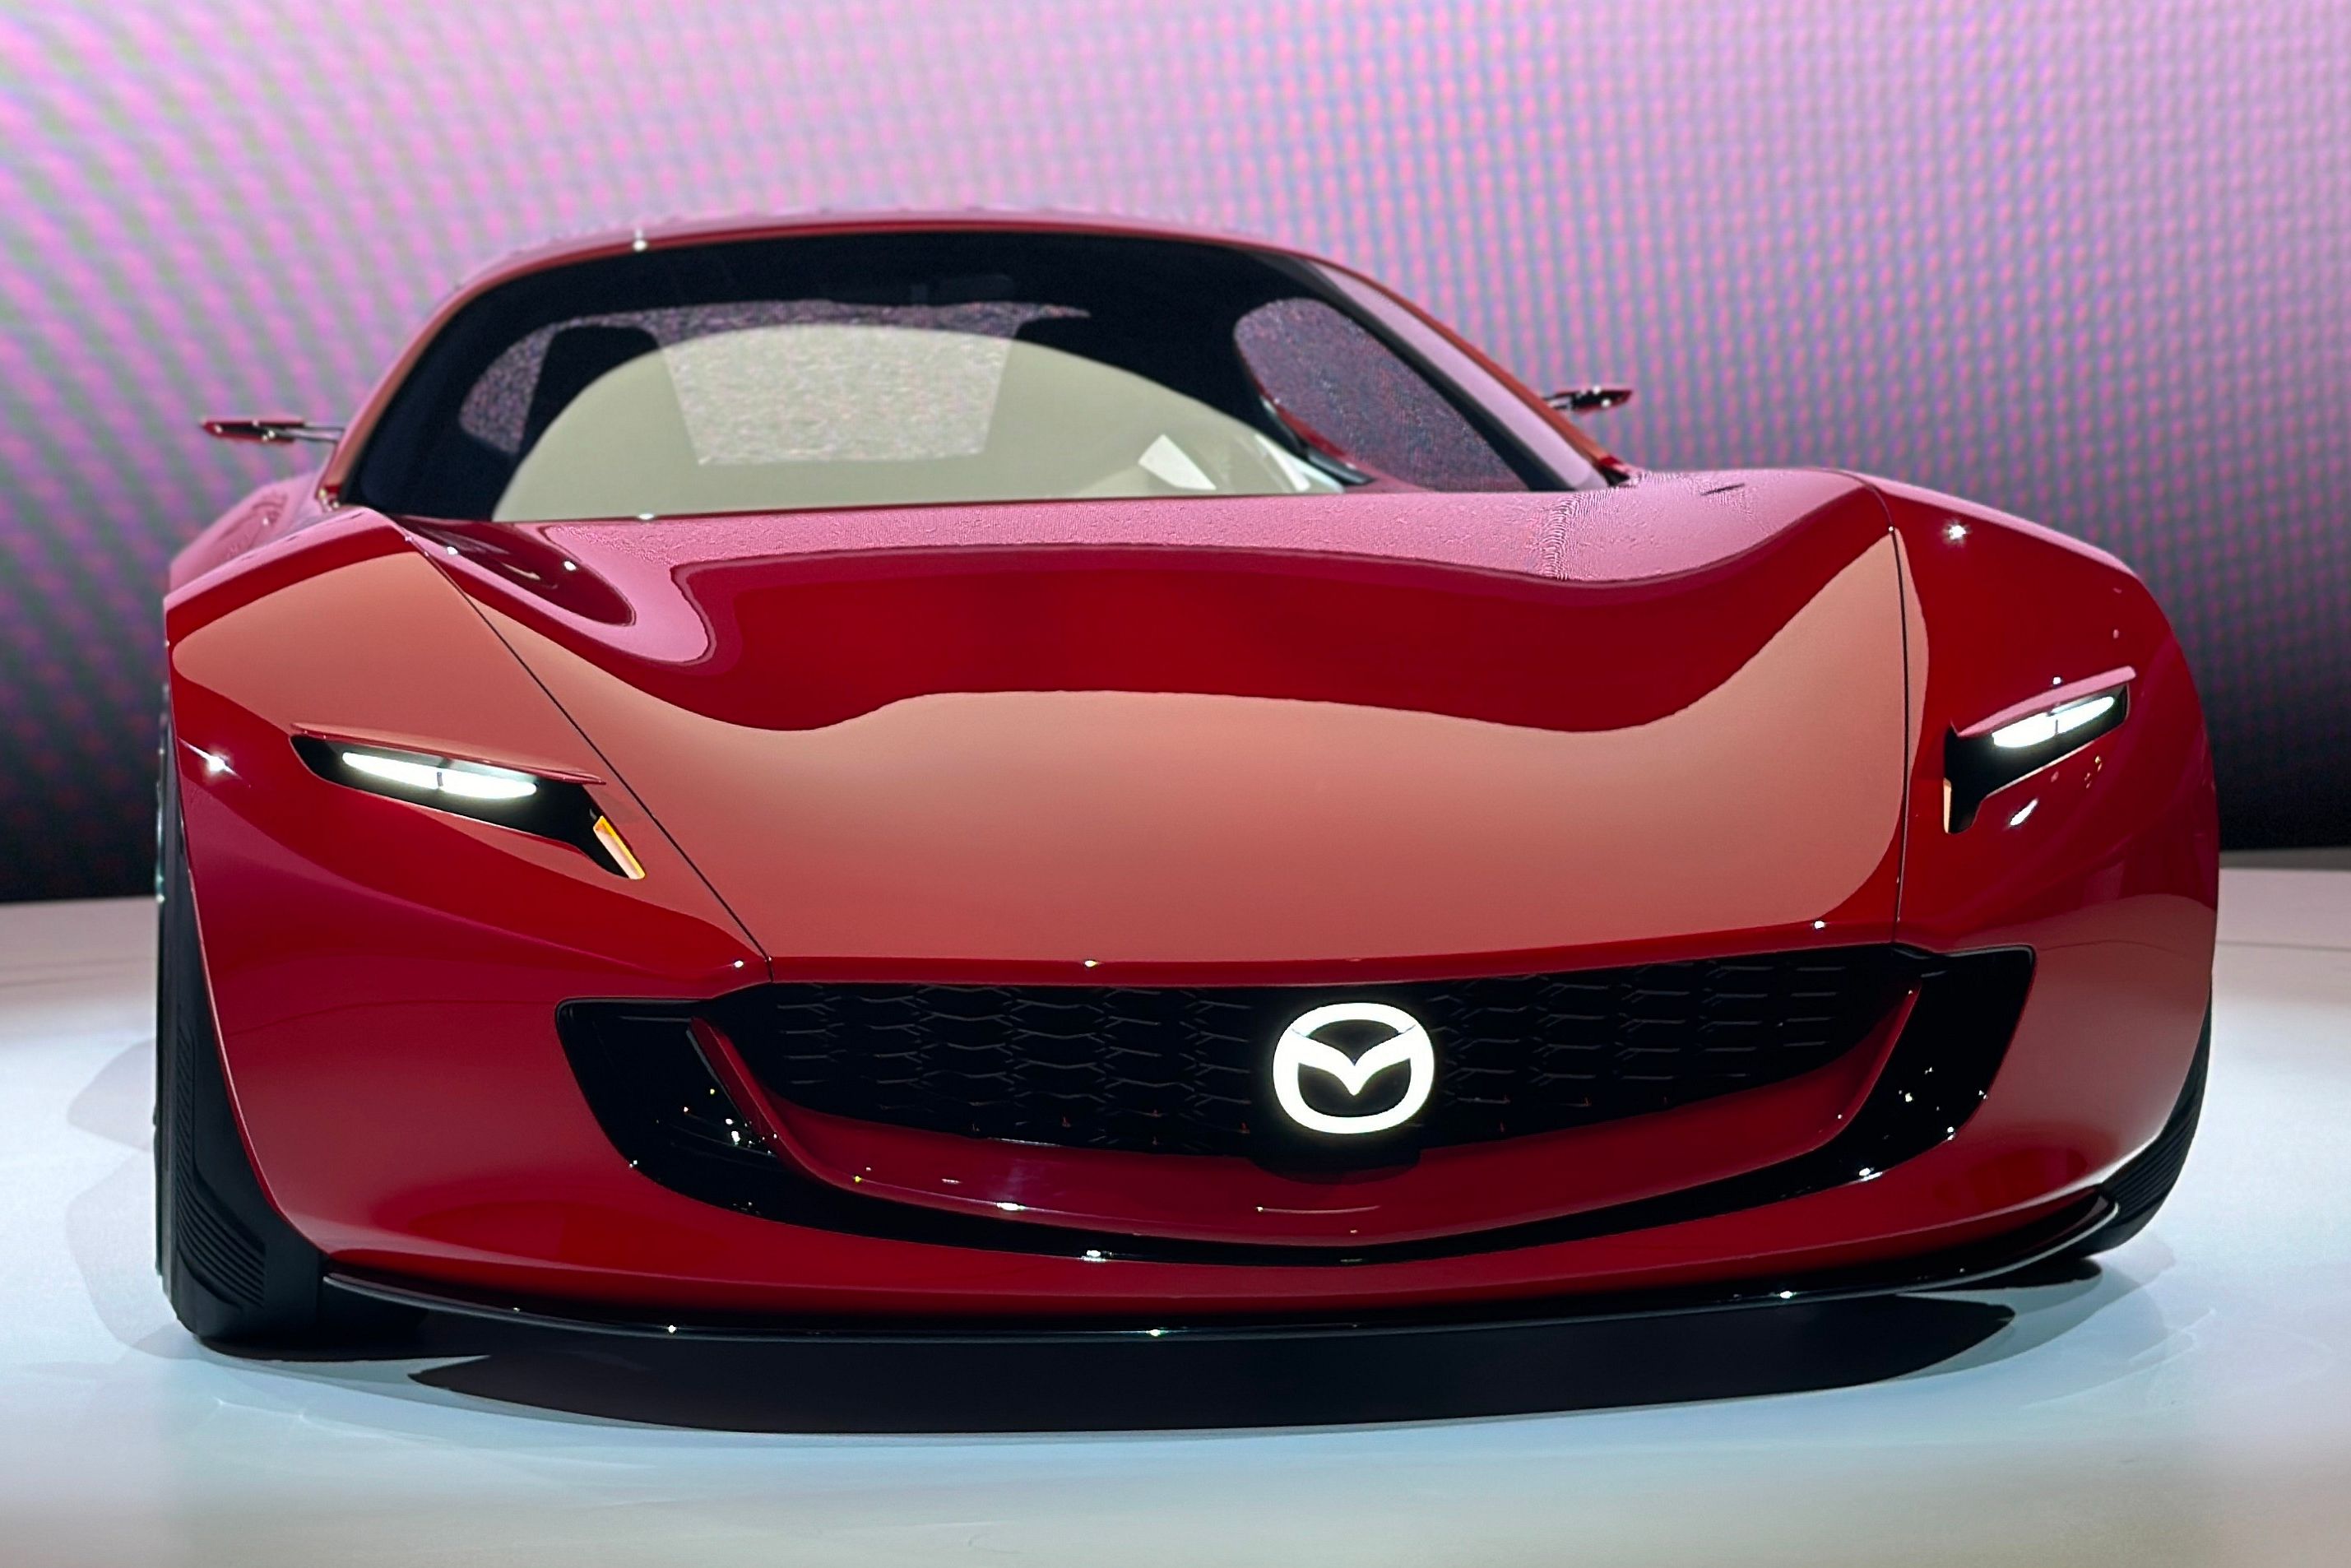 Mazda's Latest Rotary Sports Car Concept Embodies the Joy of Driving